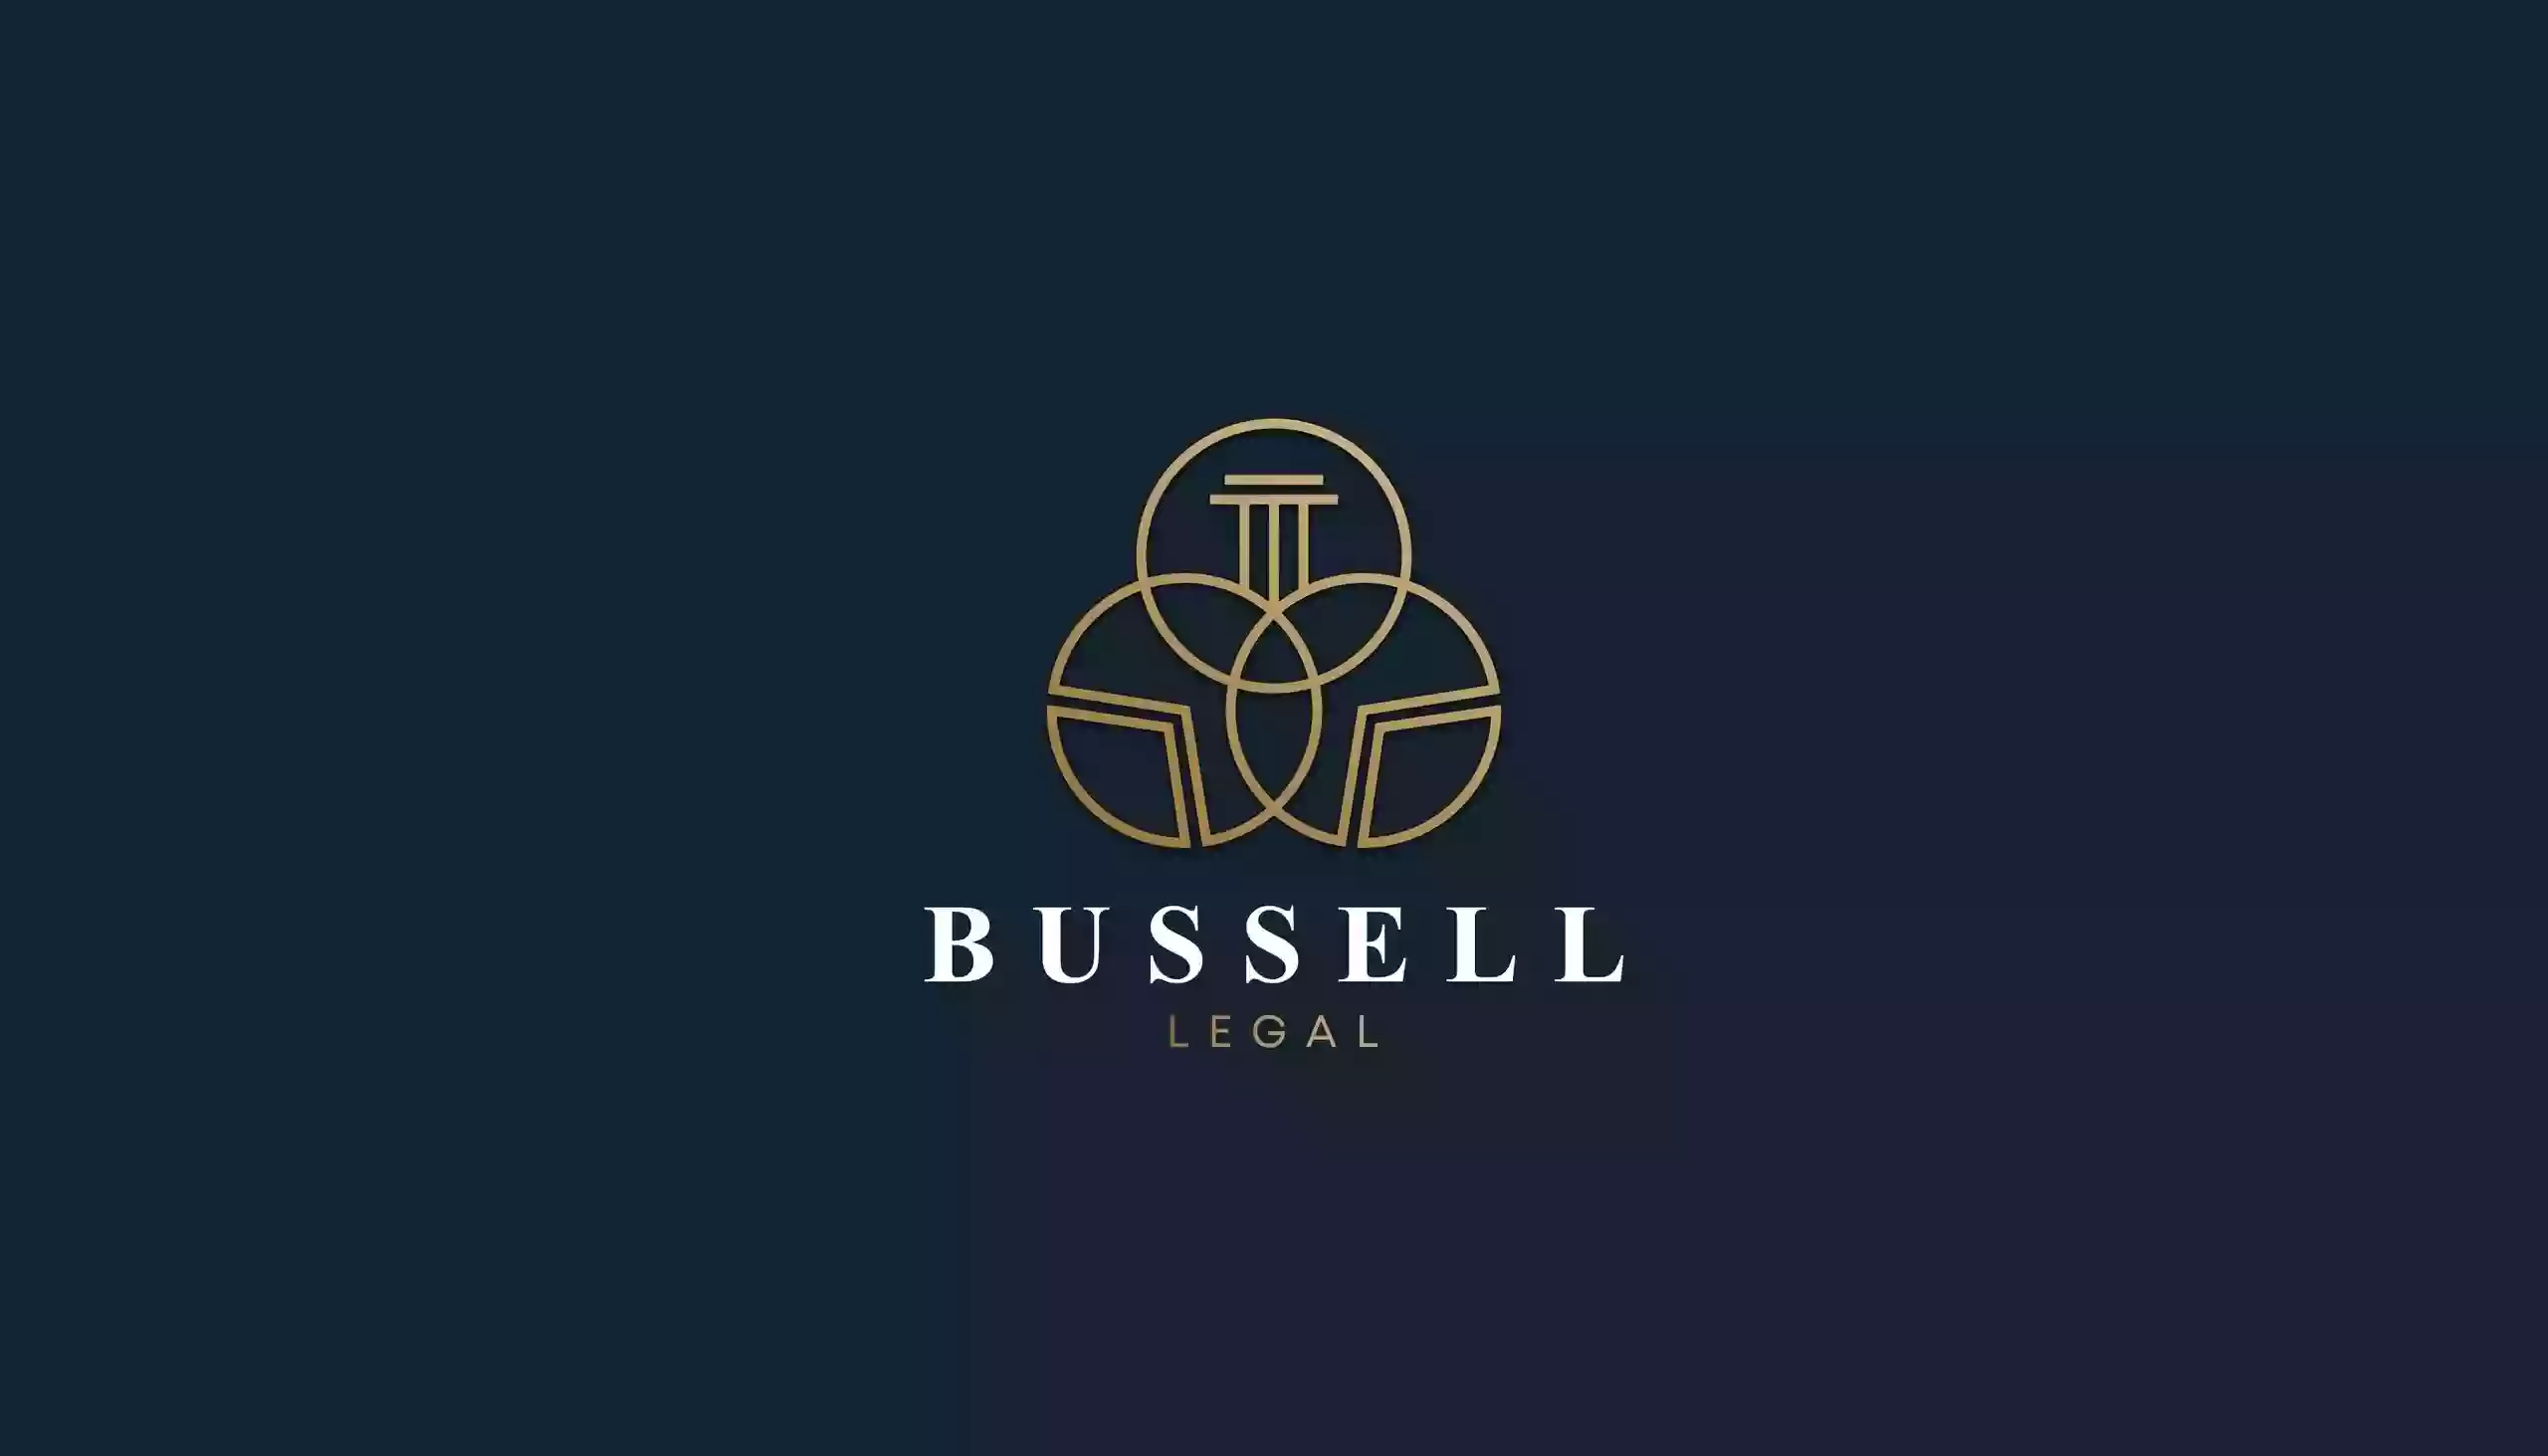 BUSSELL LEGAL